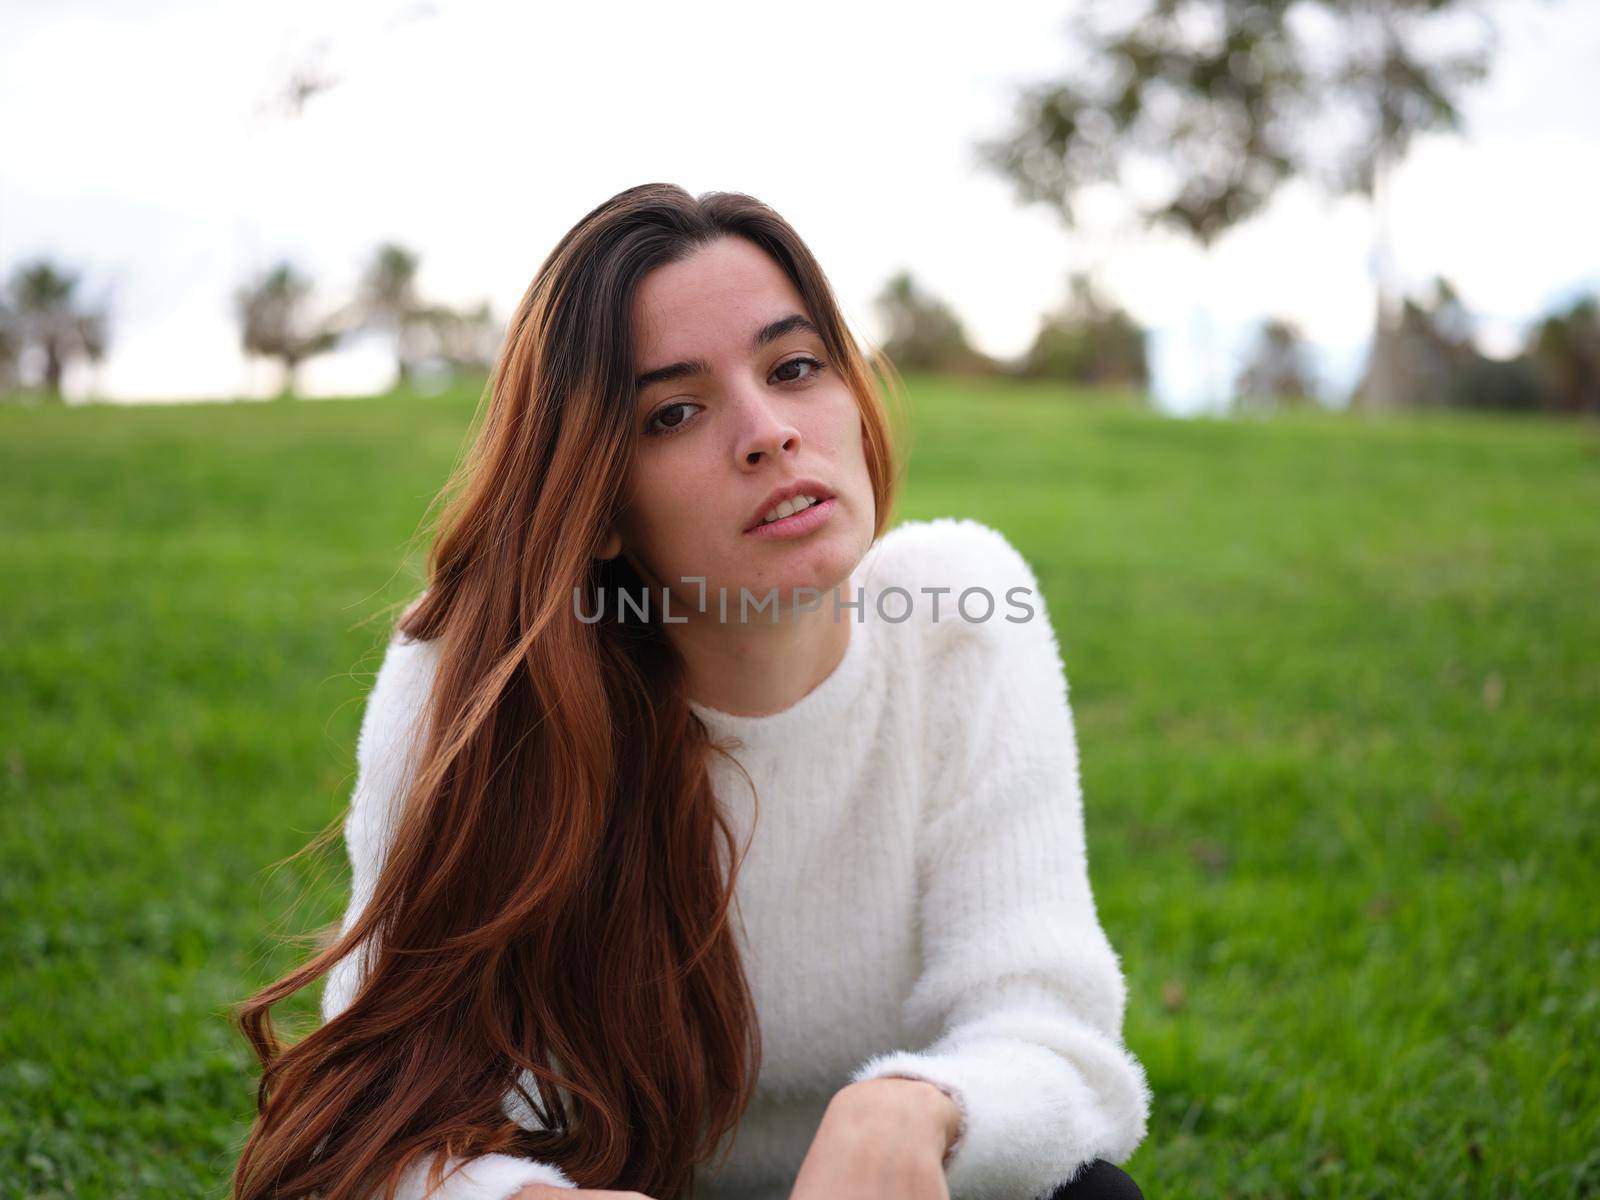 Front view of a young woman in the park looking at the camera seriously with a revengeful expression. Concept of emotions.